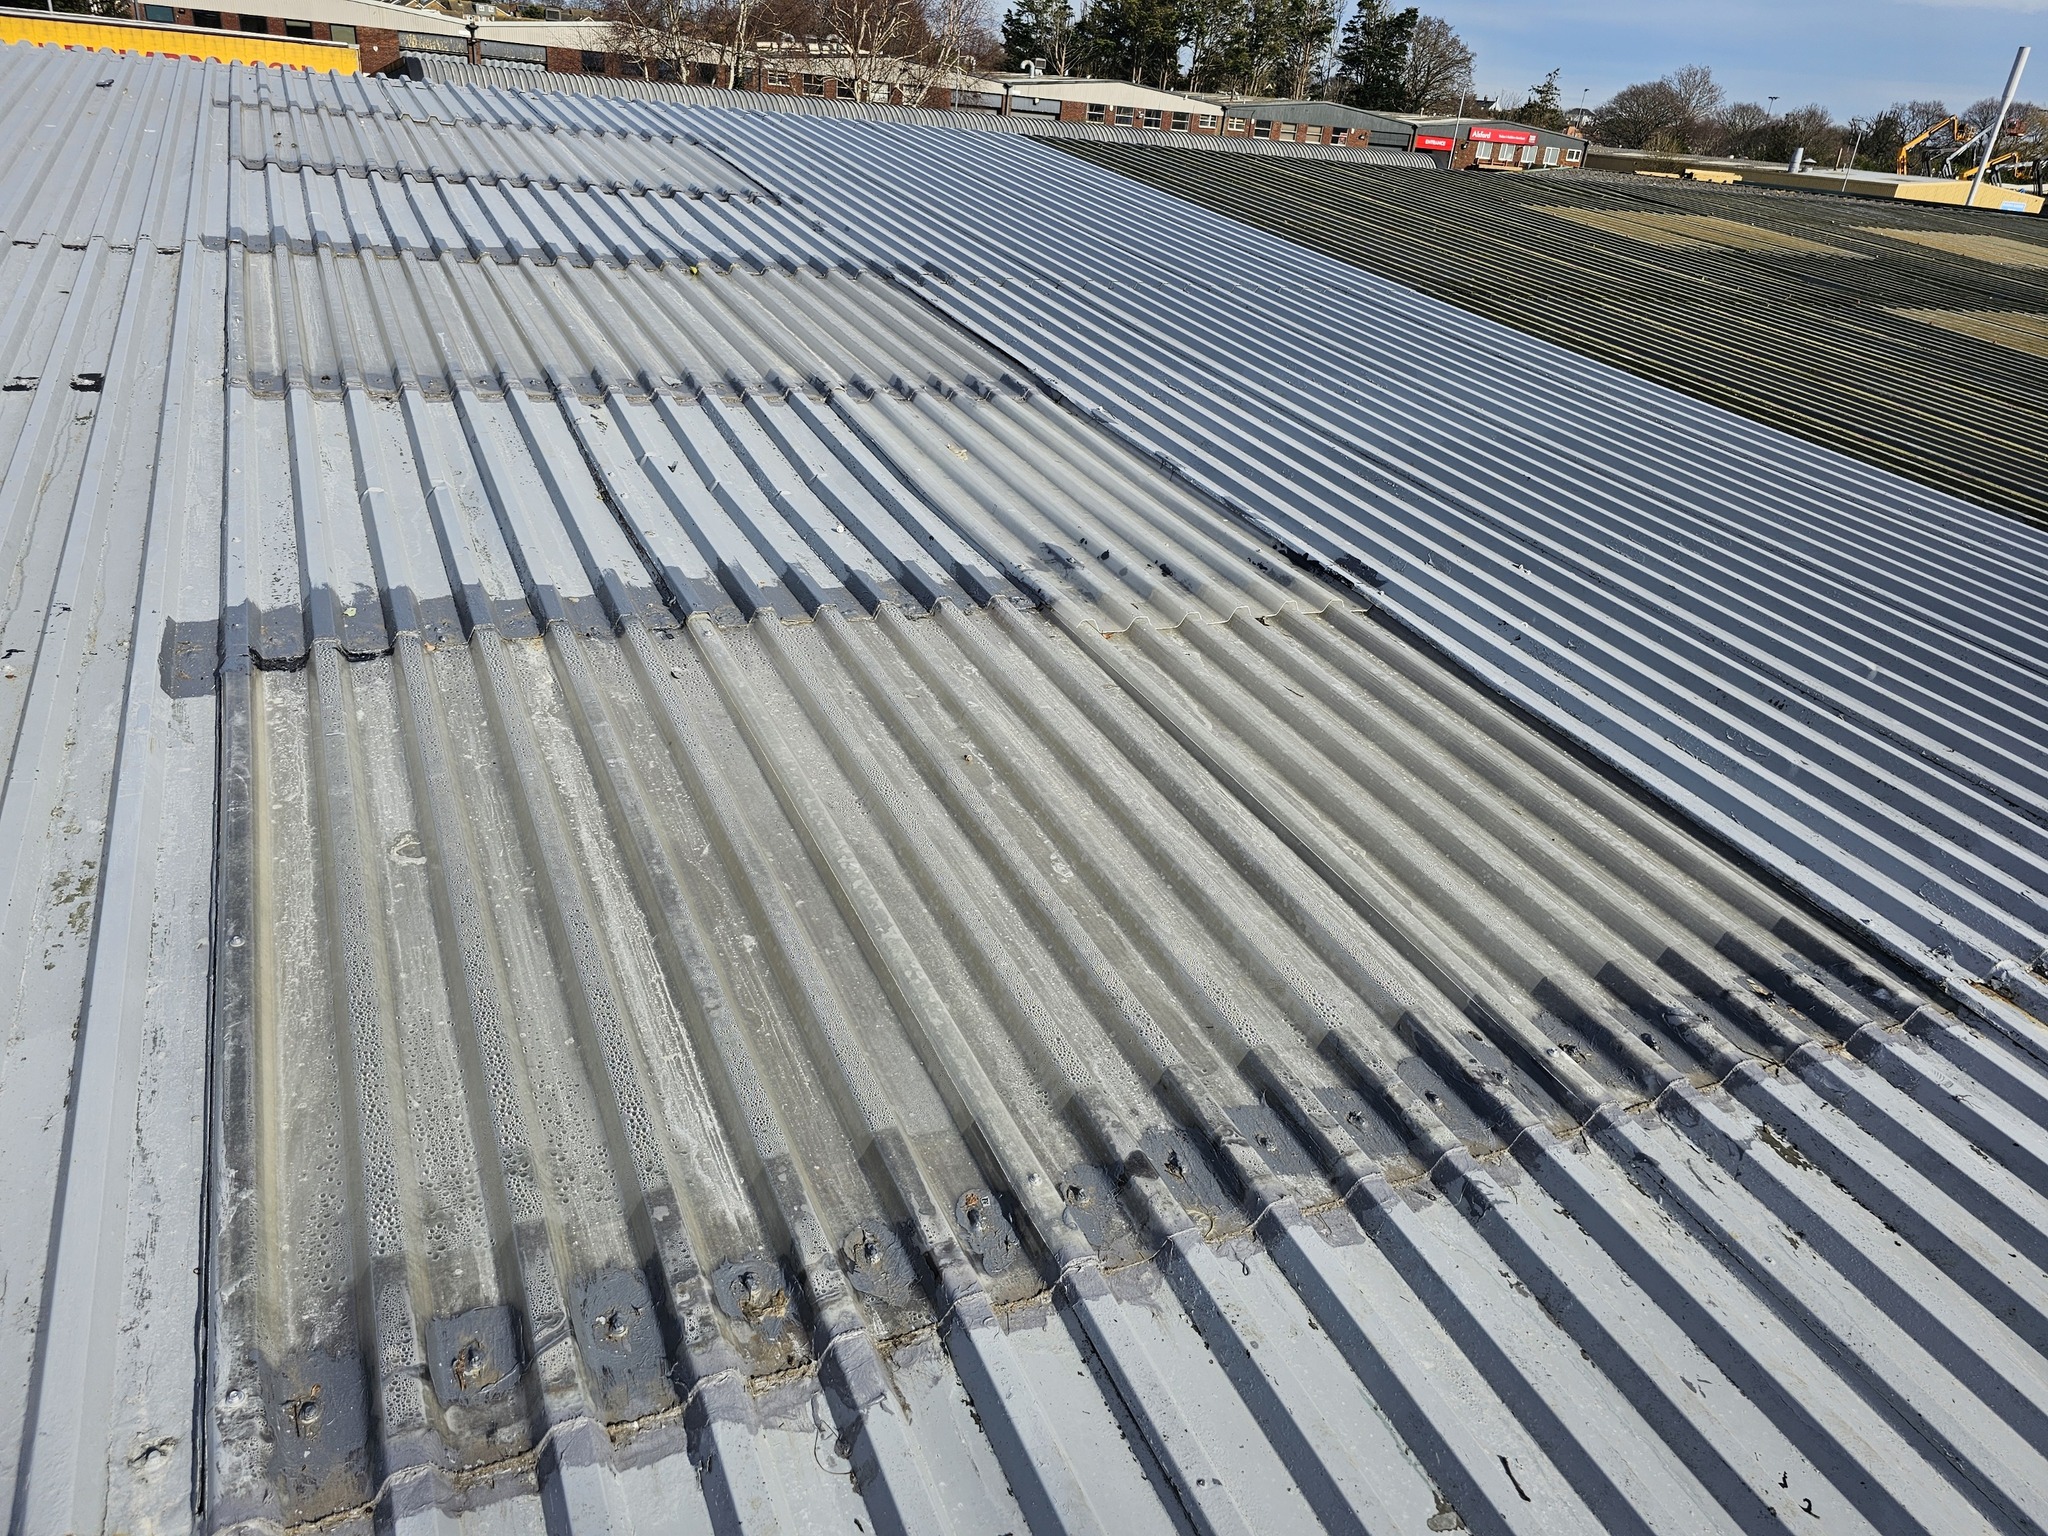 Over-roofing projects on a Warehouse and office roof in Hailsham, East Sussex